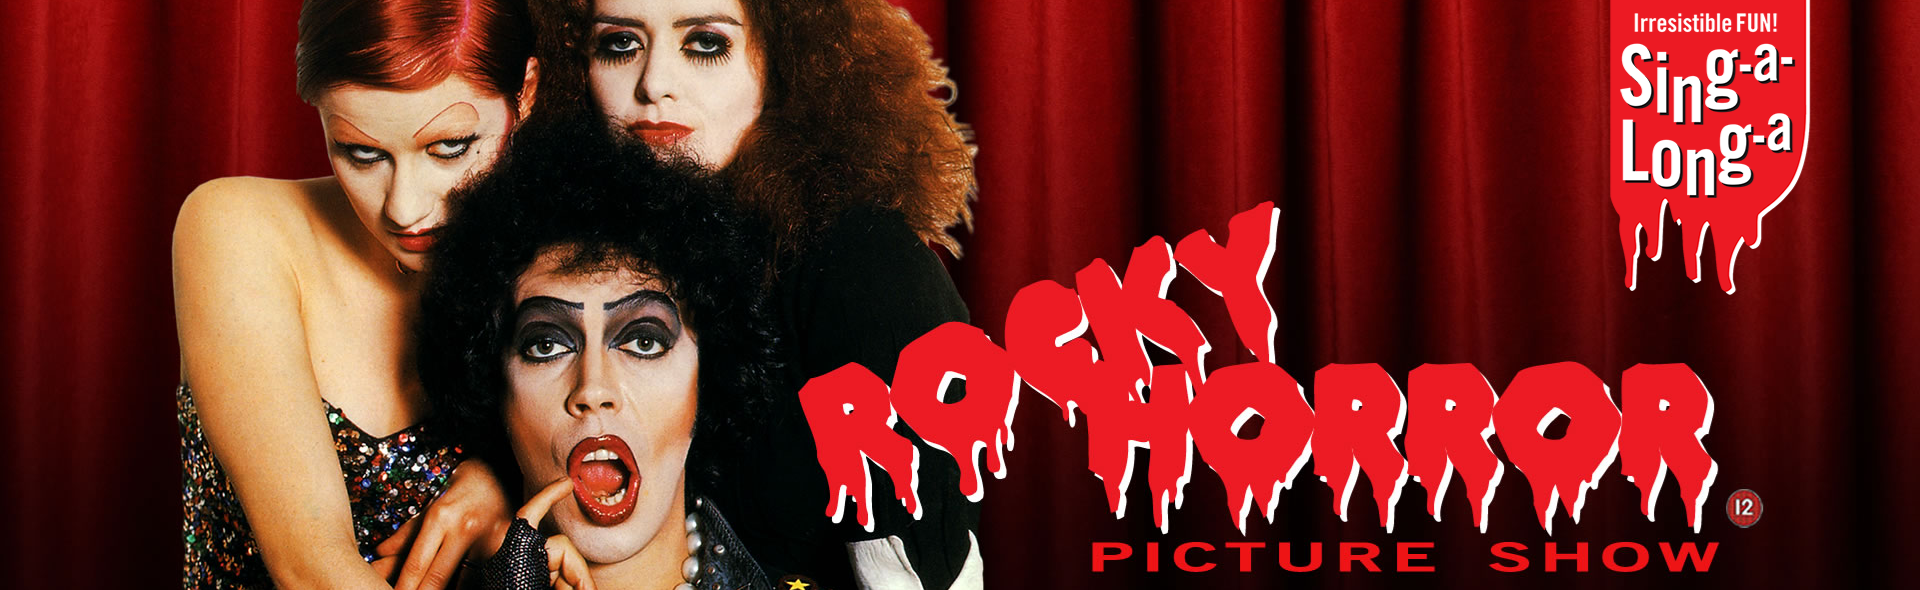 Sing-A-Long-A: The Rocky Horror Picture Show